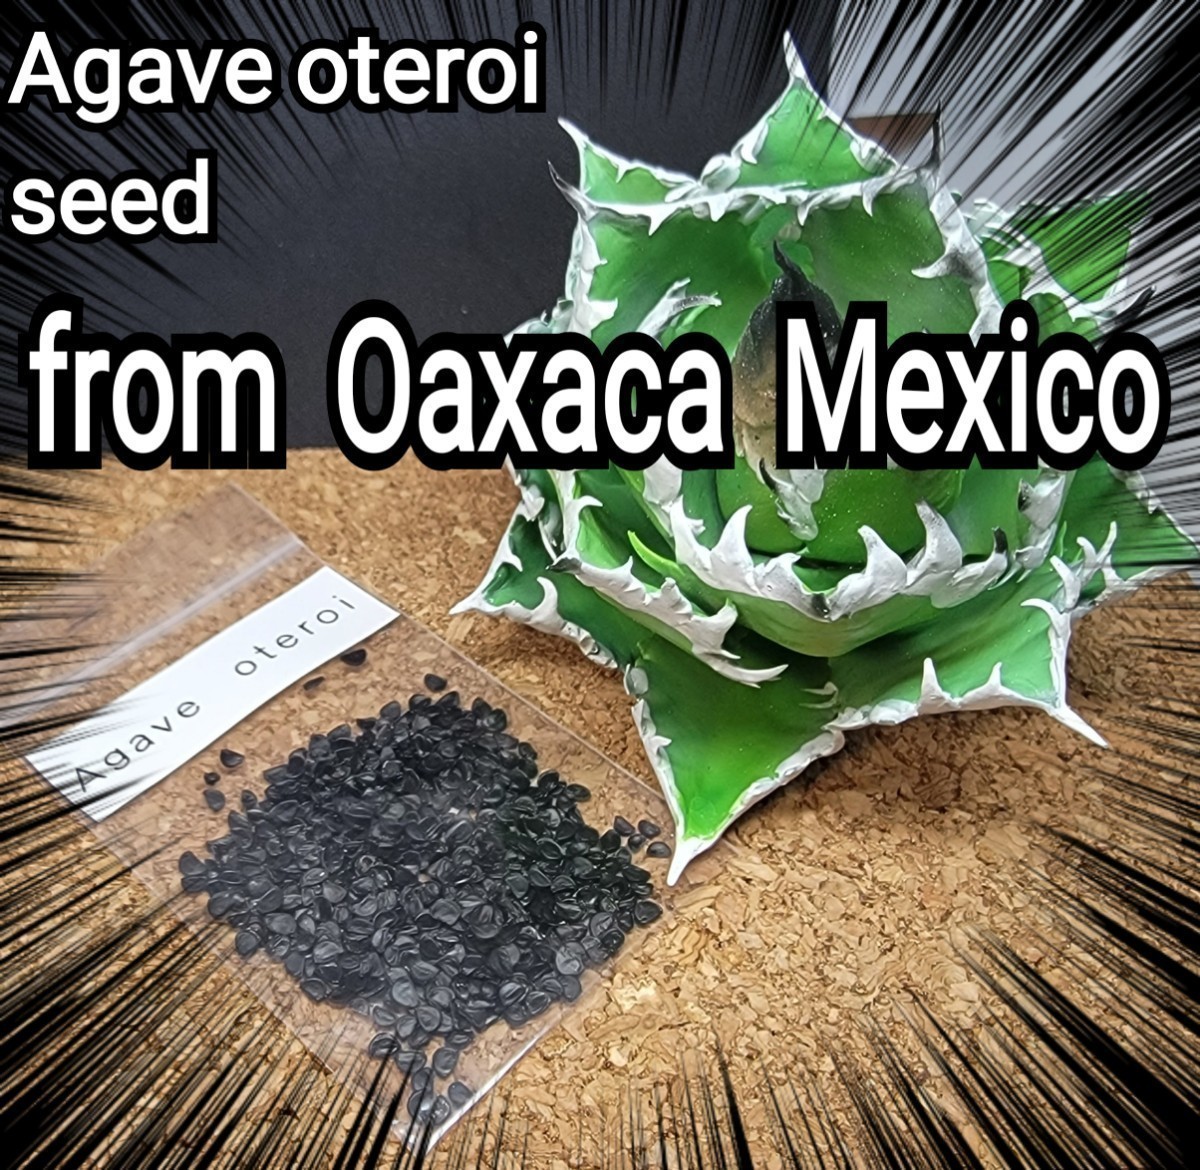 Agave oteroiseed from Oaxaca Mexico seeds [10 bead ] good .. carefuly selected freshness. is good kind therefore germination proportion . high! certainly, real raw . Challenge please 